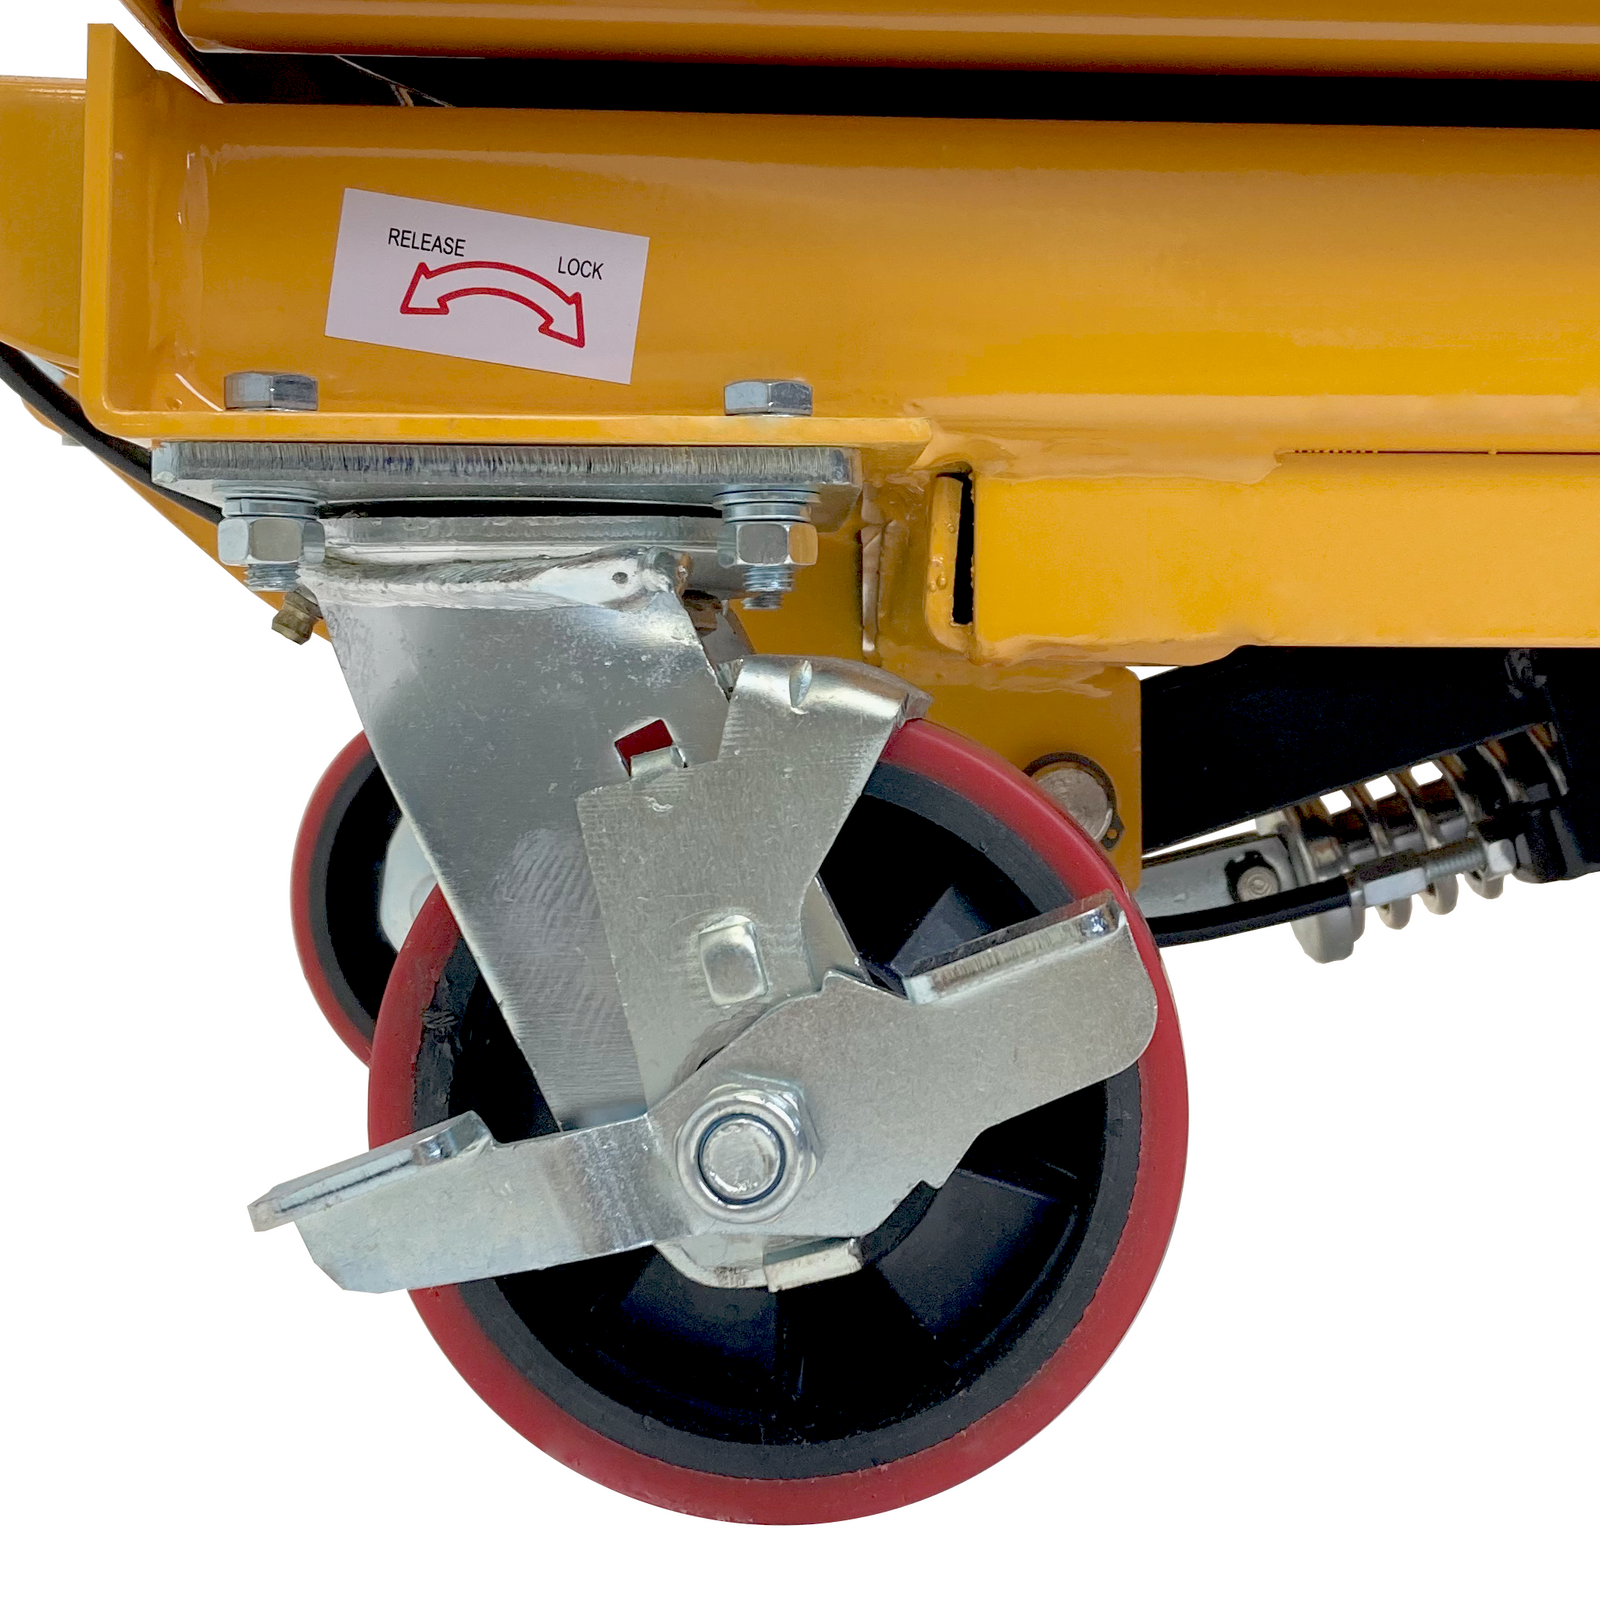 Close up of one of the rugged red back wheels with brakes of the mobile scissor lift table for 1100 pounds. Image shows a sticker that describes the position for the brake to be released and to be locked.